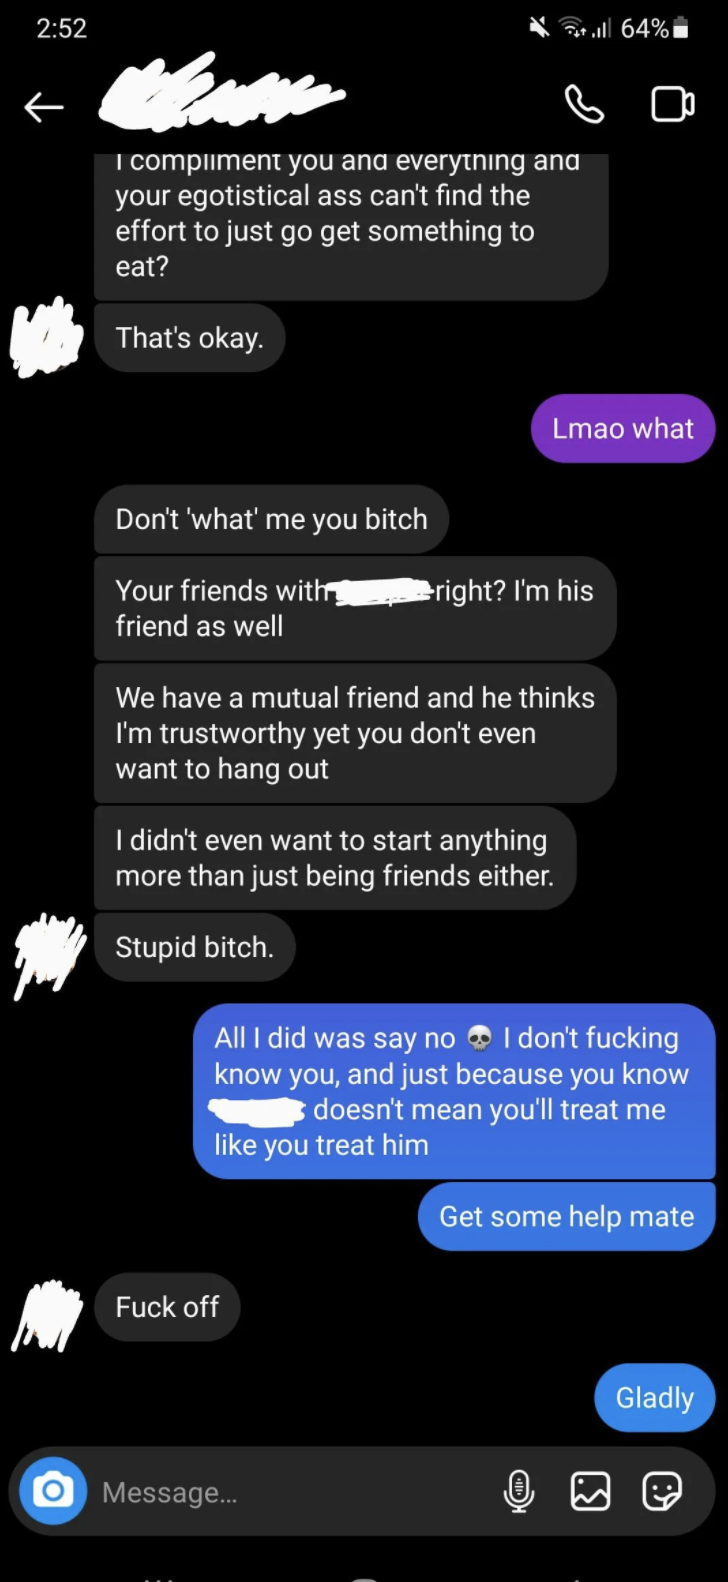 The exchange continues with her saying &quot;What,&quot; he says &quot;Don&#x27;t &#x27;what&#x27; me, bitch,&quot; calls her a stupid bitch,&quot; and when she says just because they both know someone doesn&#x27;t mean she knows HIM and that he should get some help, he responds with &quot;Fuck off&quot;